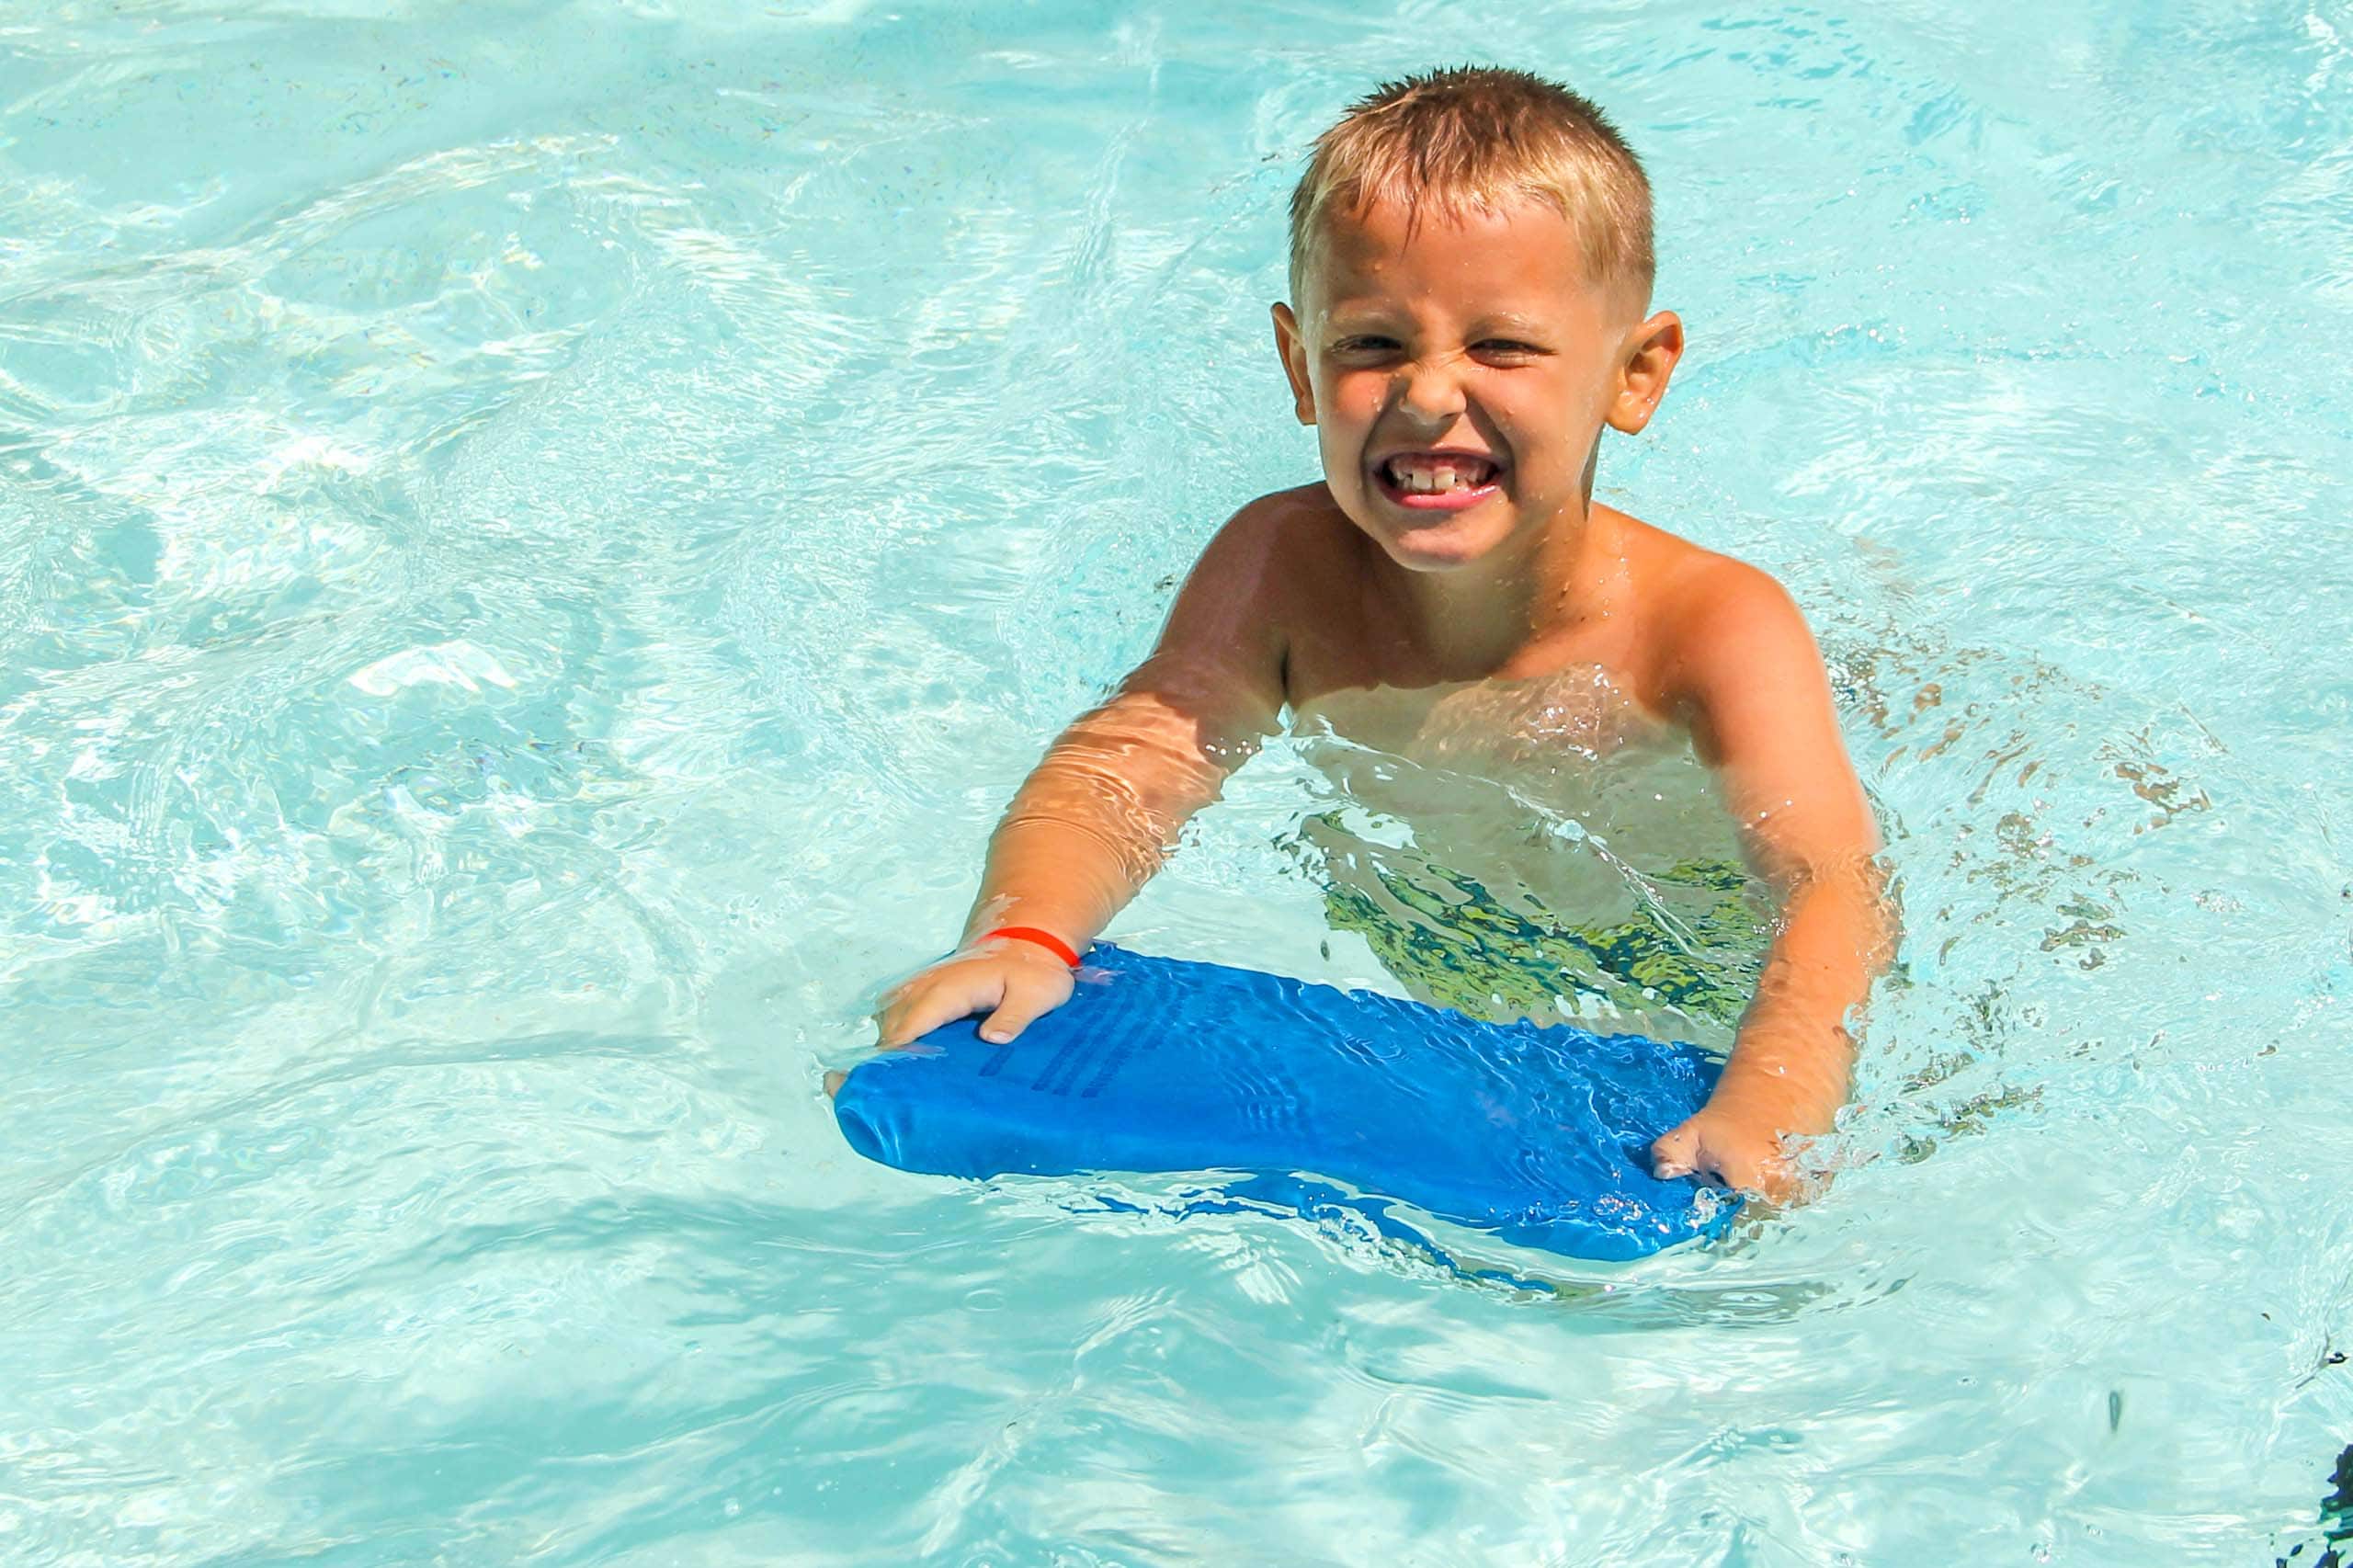 A young boy at an Iowa summer camp in a pool holding a blue pool float.